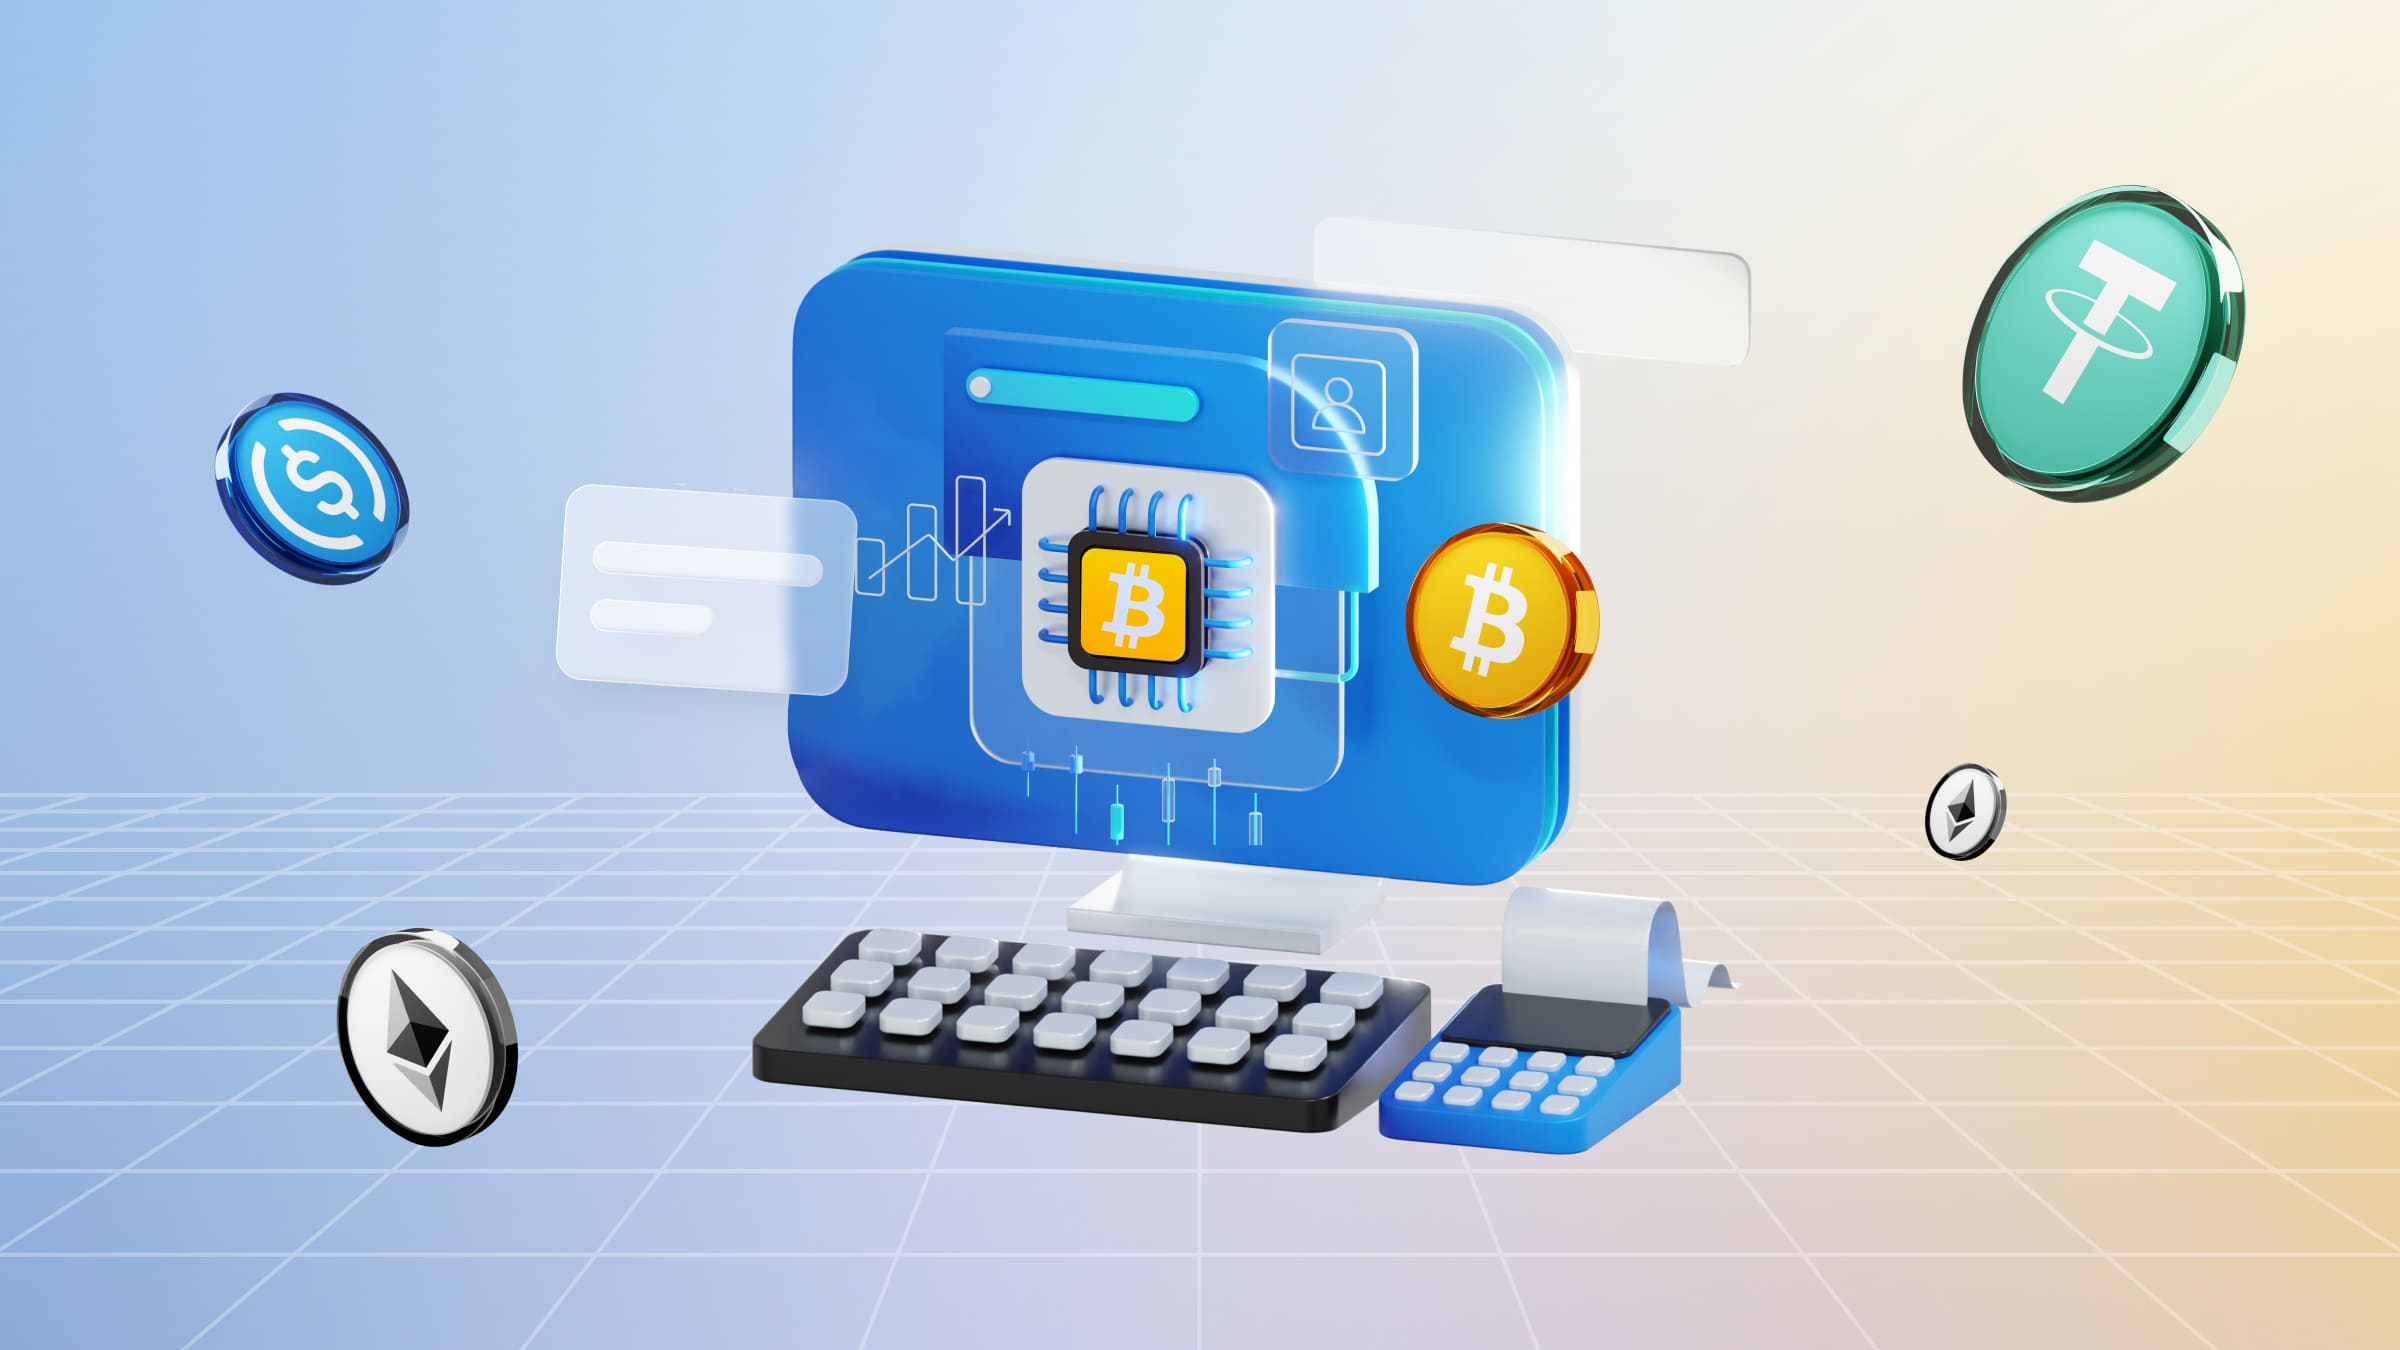 Desktop cryptocurrency wallets are installed on a personal computer.